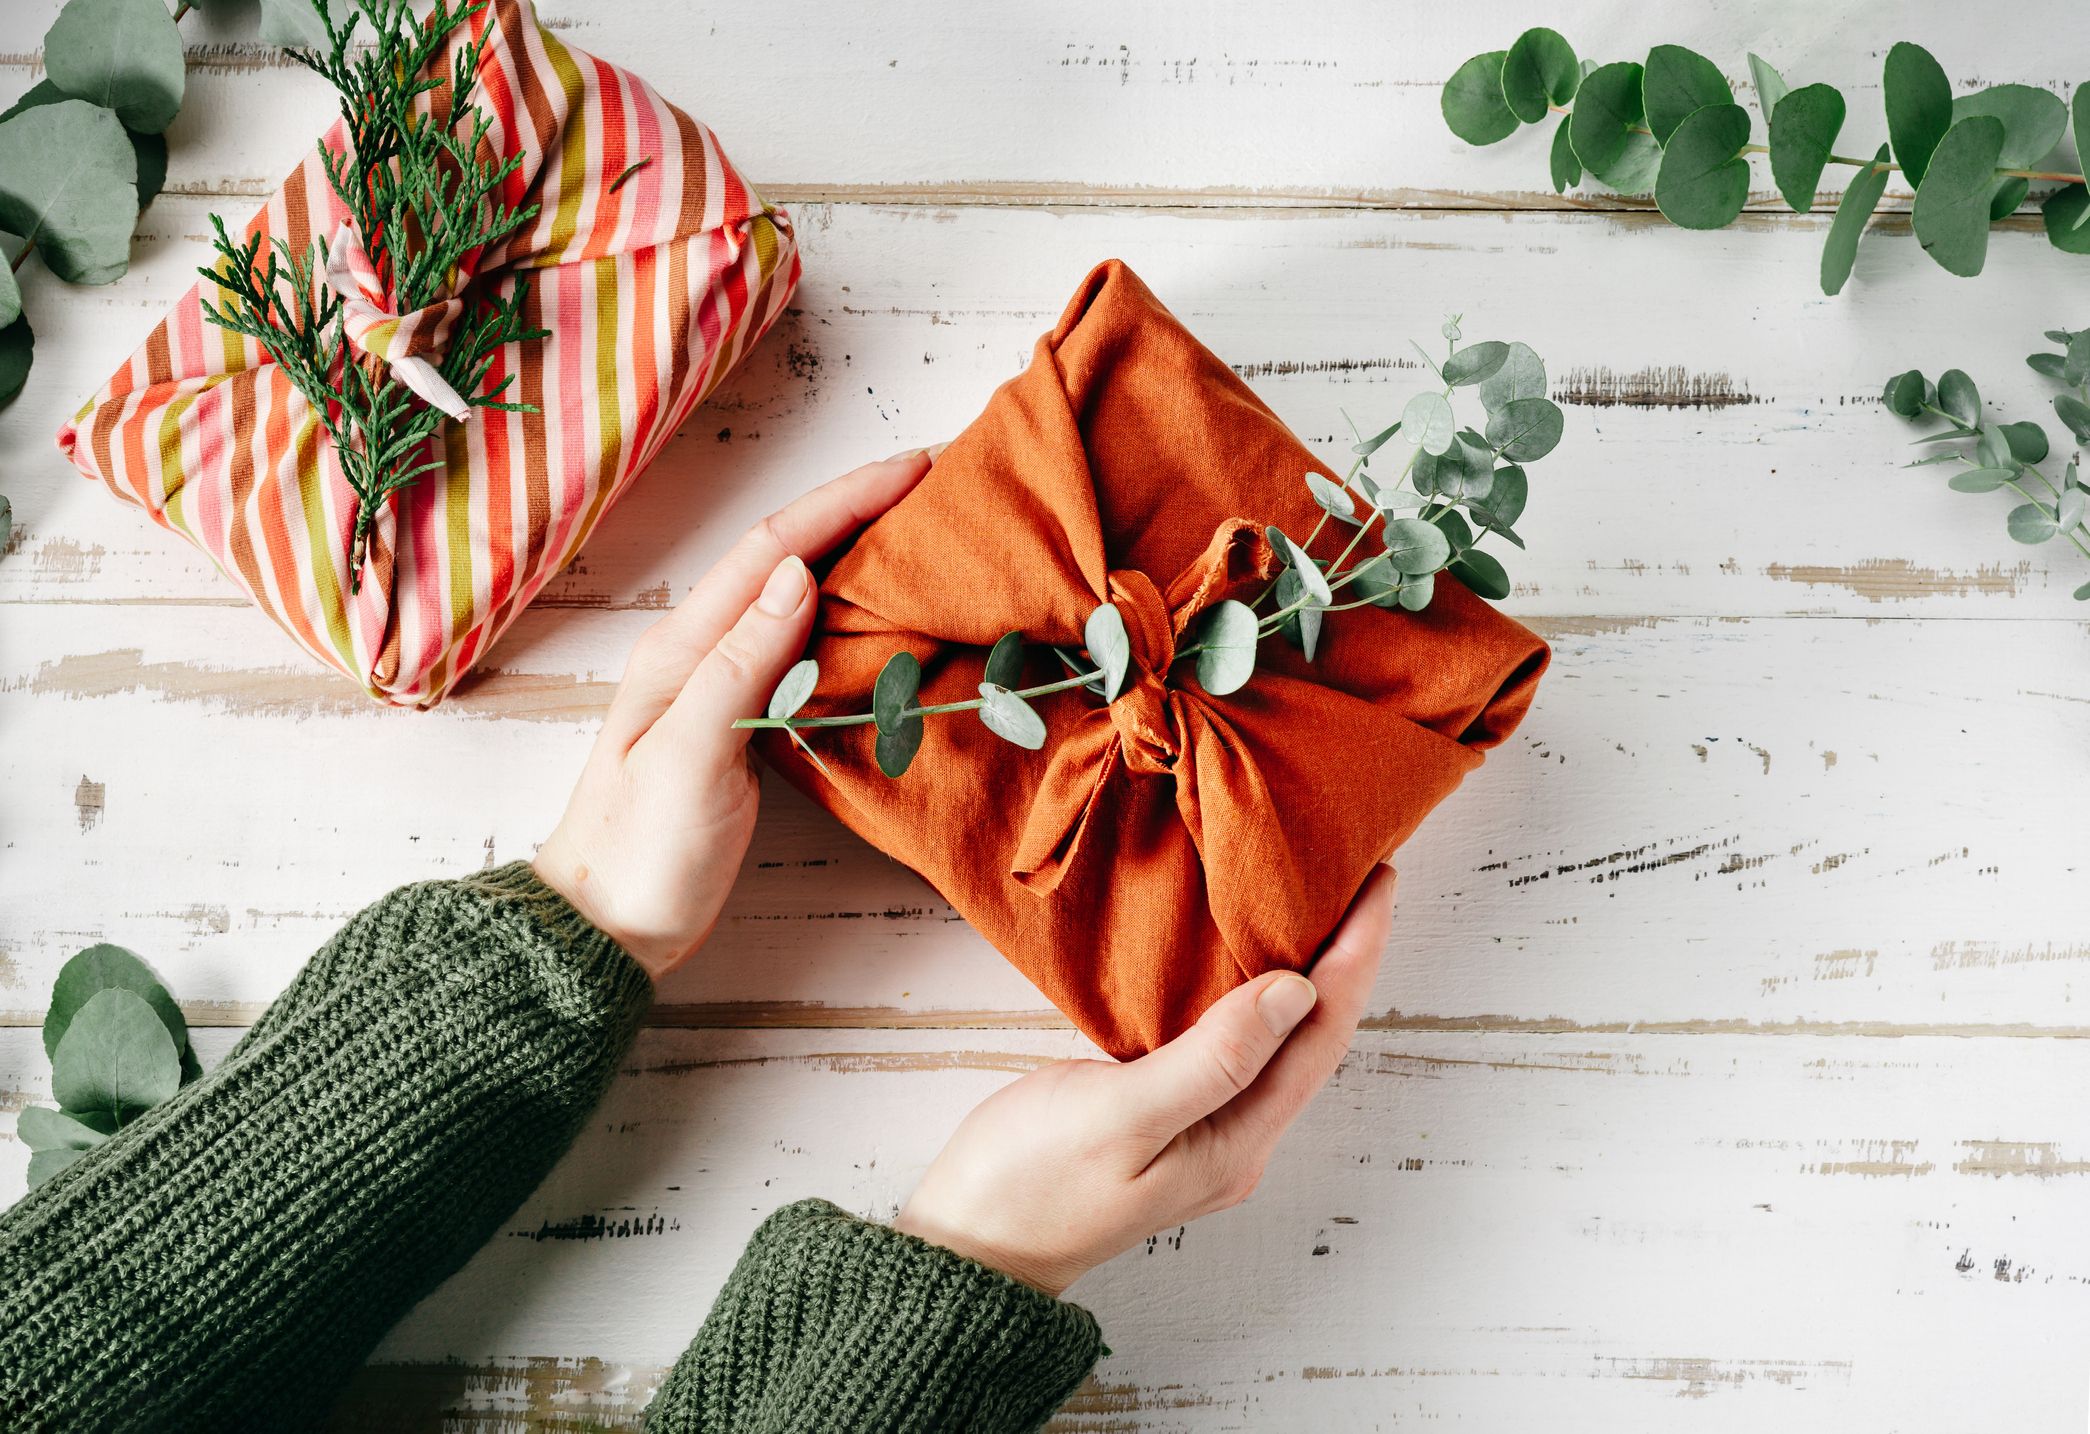 CHRISTMAS GIFT ETIQUETTE - YOUR QUESTONS ANSWERED